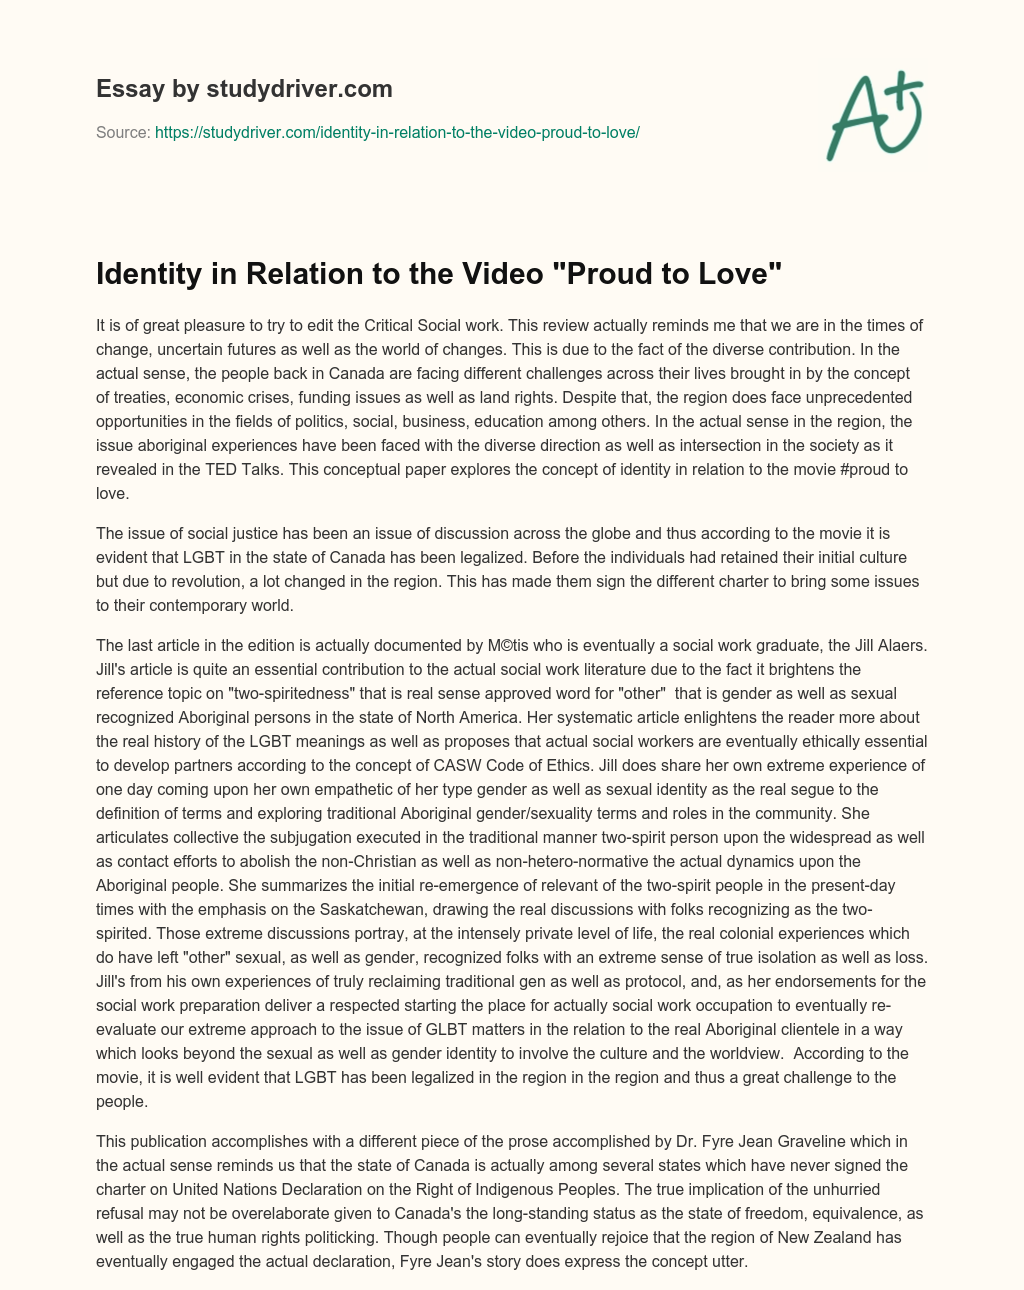 Identity in Relation to the Video “Proud to Love” essay